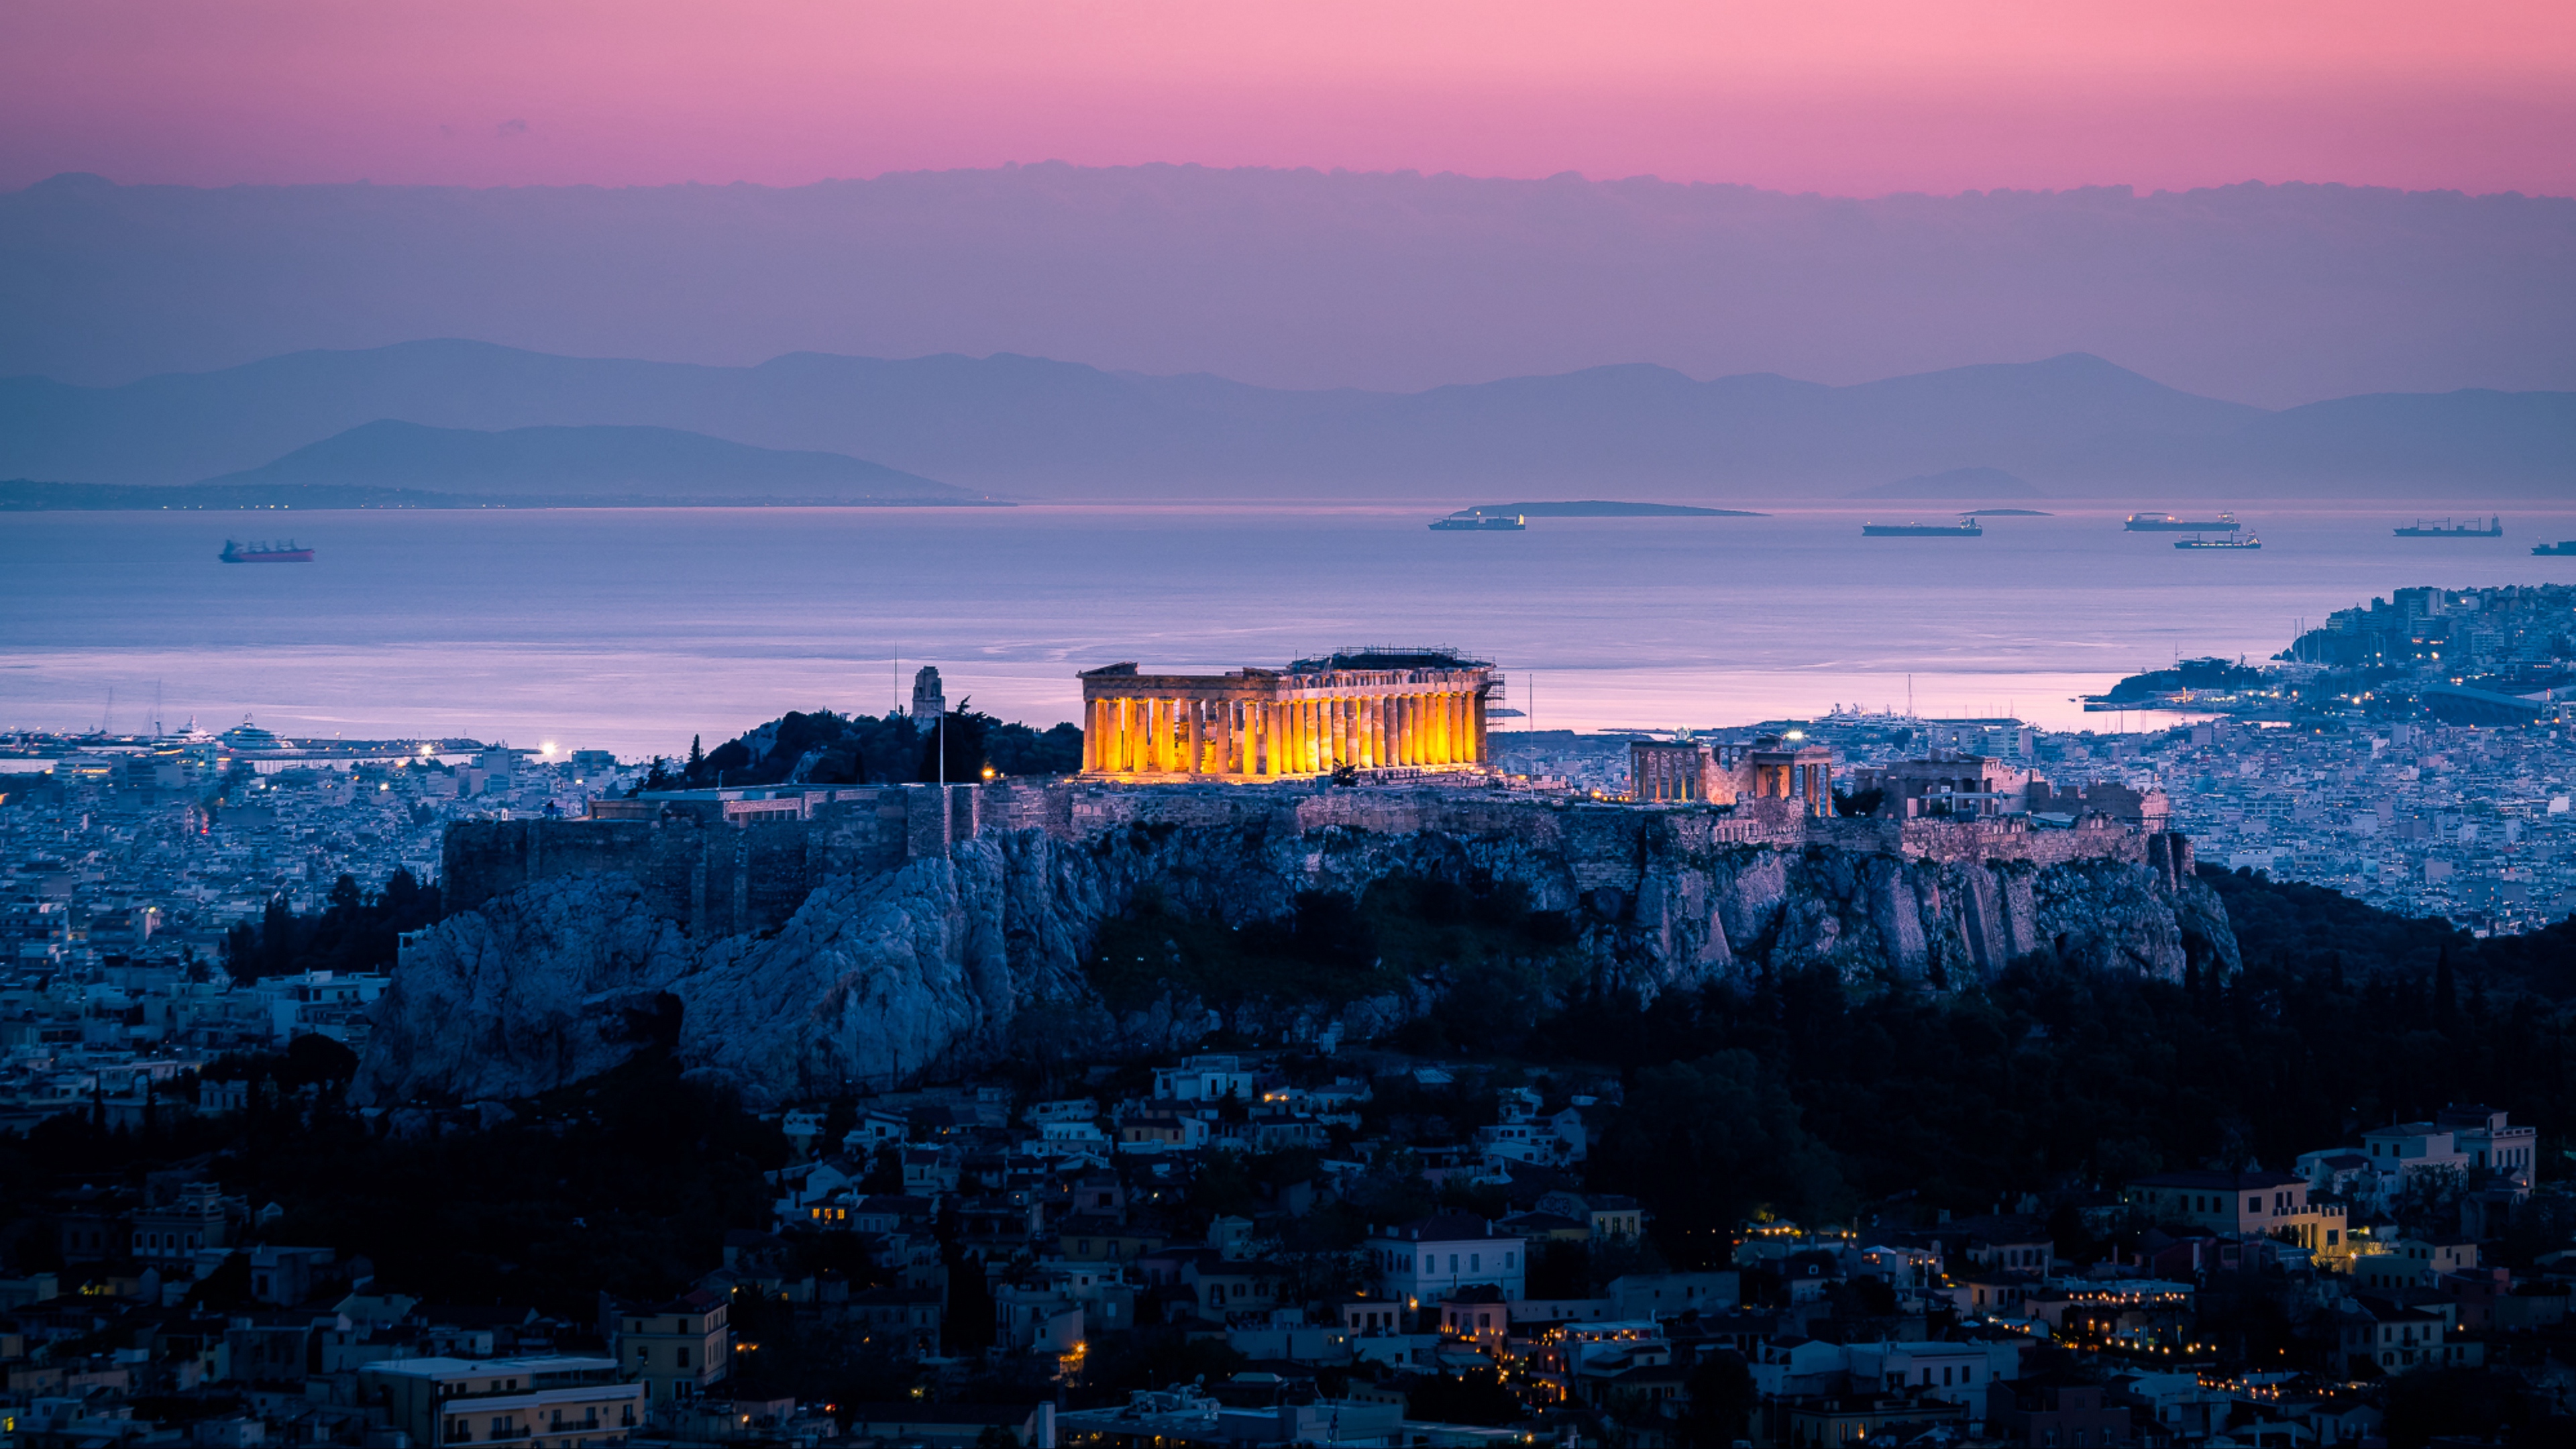 Wallpaper Architecture, Sunset, Sea, Acropolis, Athens, - Athens Greece Phone Background - HD Wallpaper 